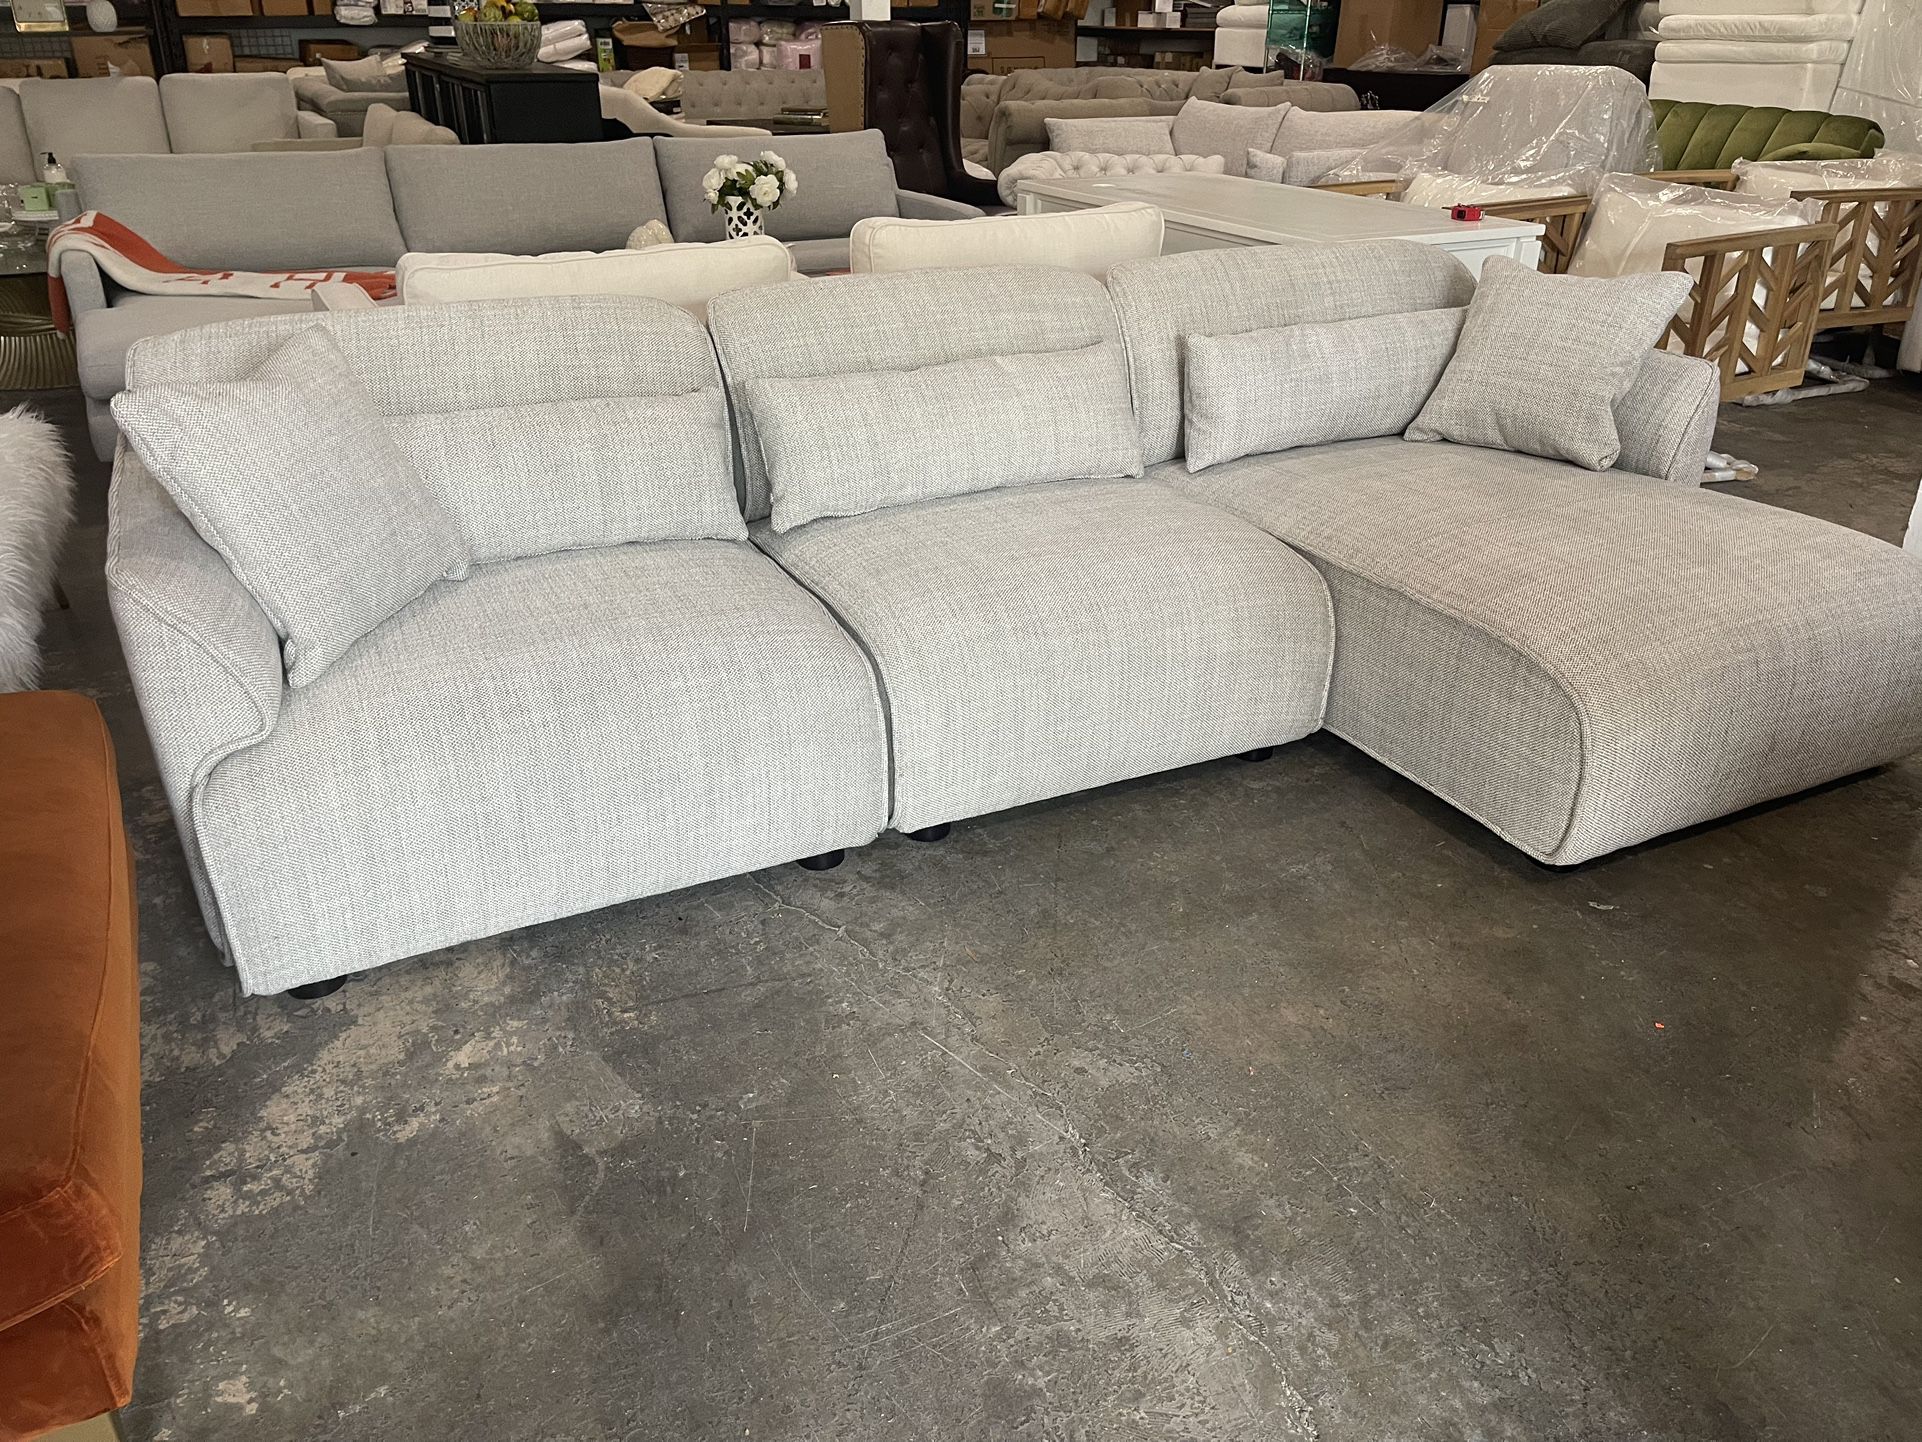 stylish Sofa Chaise - by Abbyson - Gray Fabric - New - Delivery 🚚